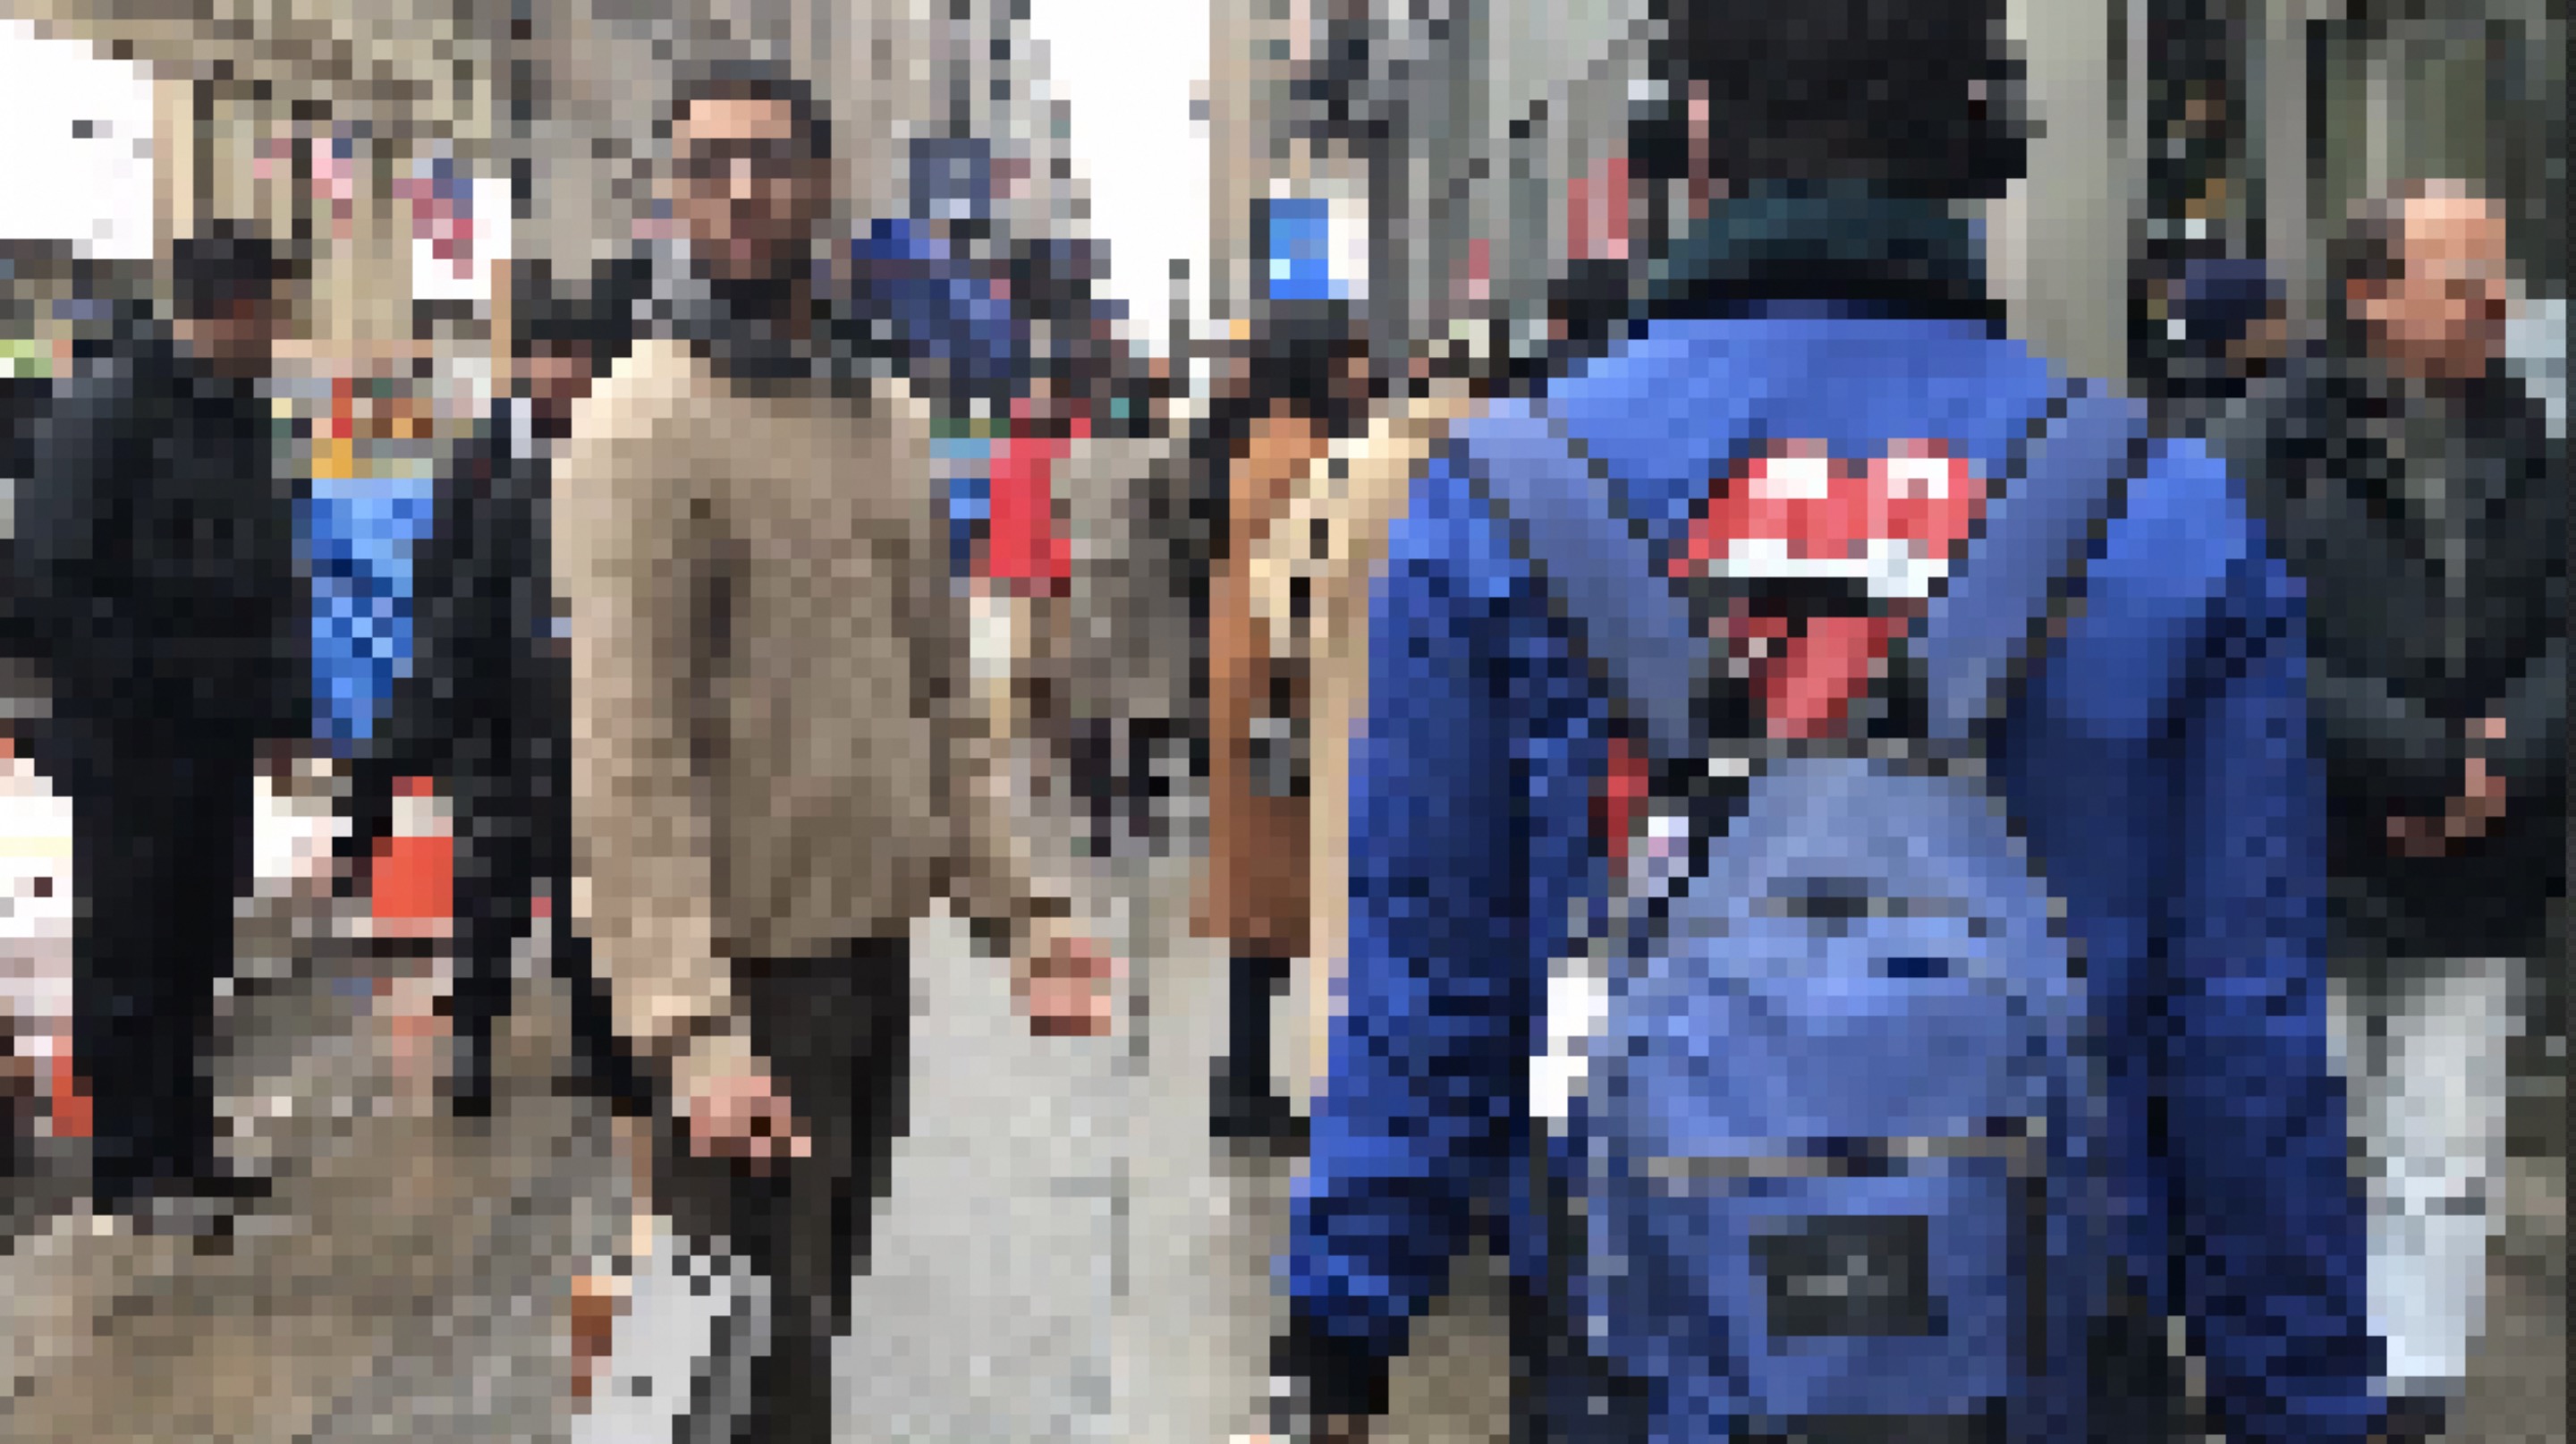 pixelated image of bodies of people walking past each other